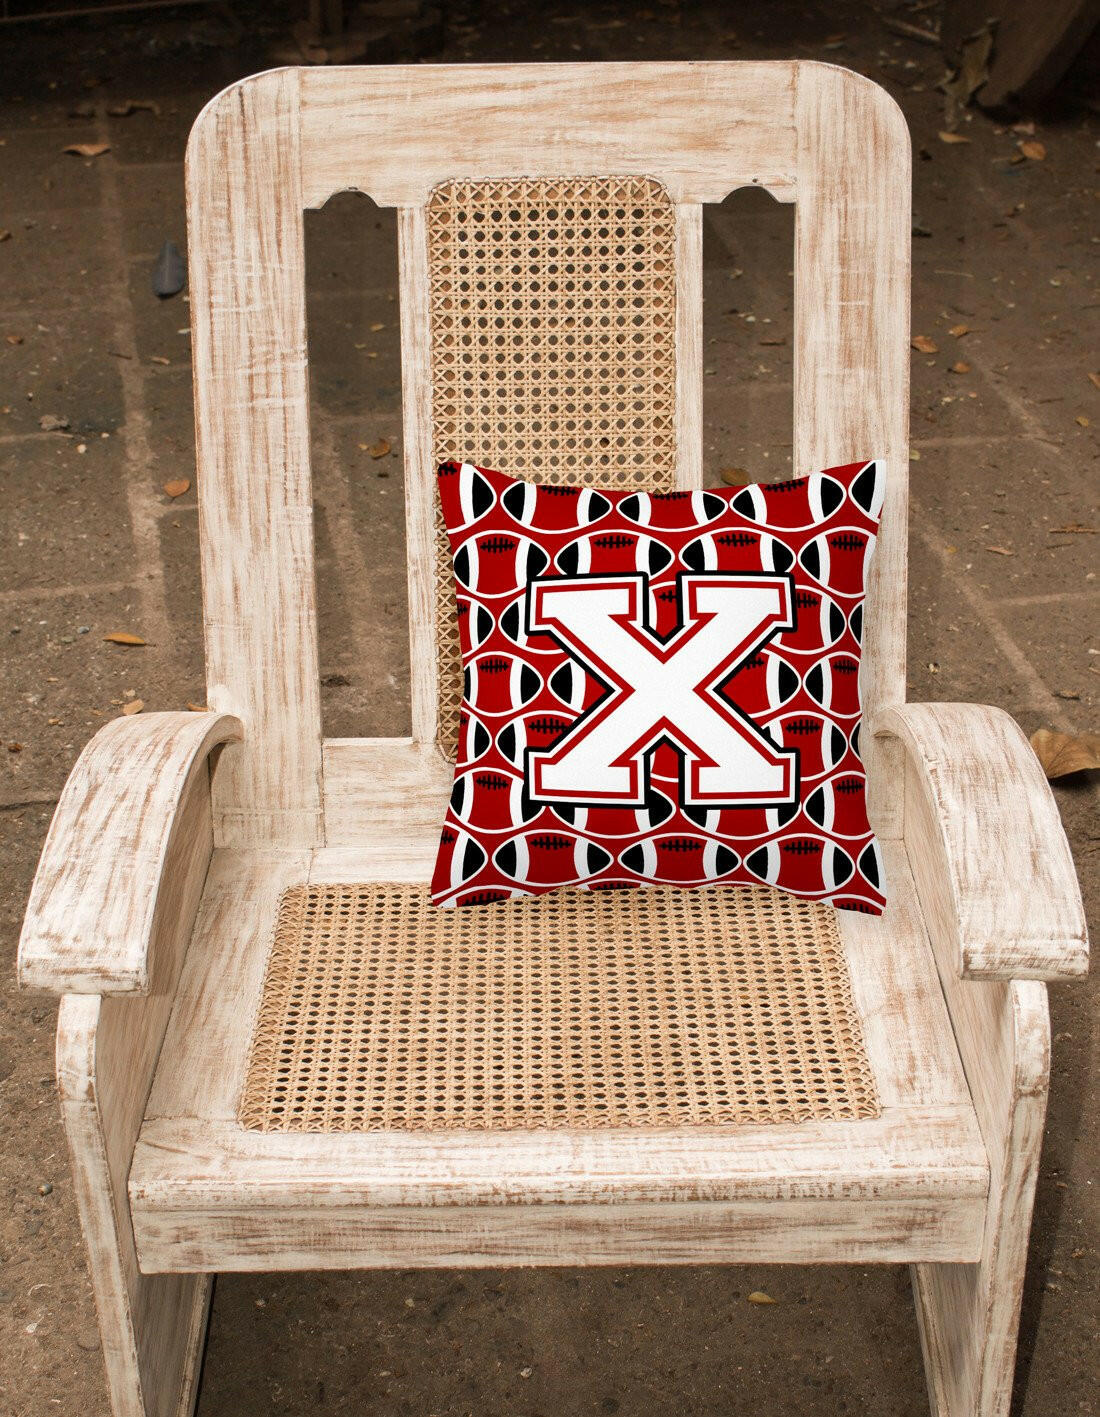 Letter X Football Cardinal and White Fabric Decorative Pillow CJ1082-XPW1414 by Caroline's Treasures